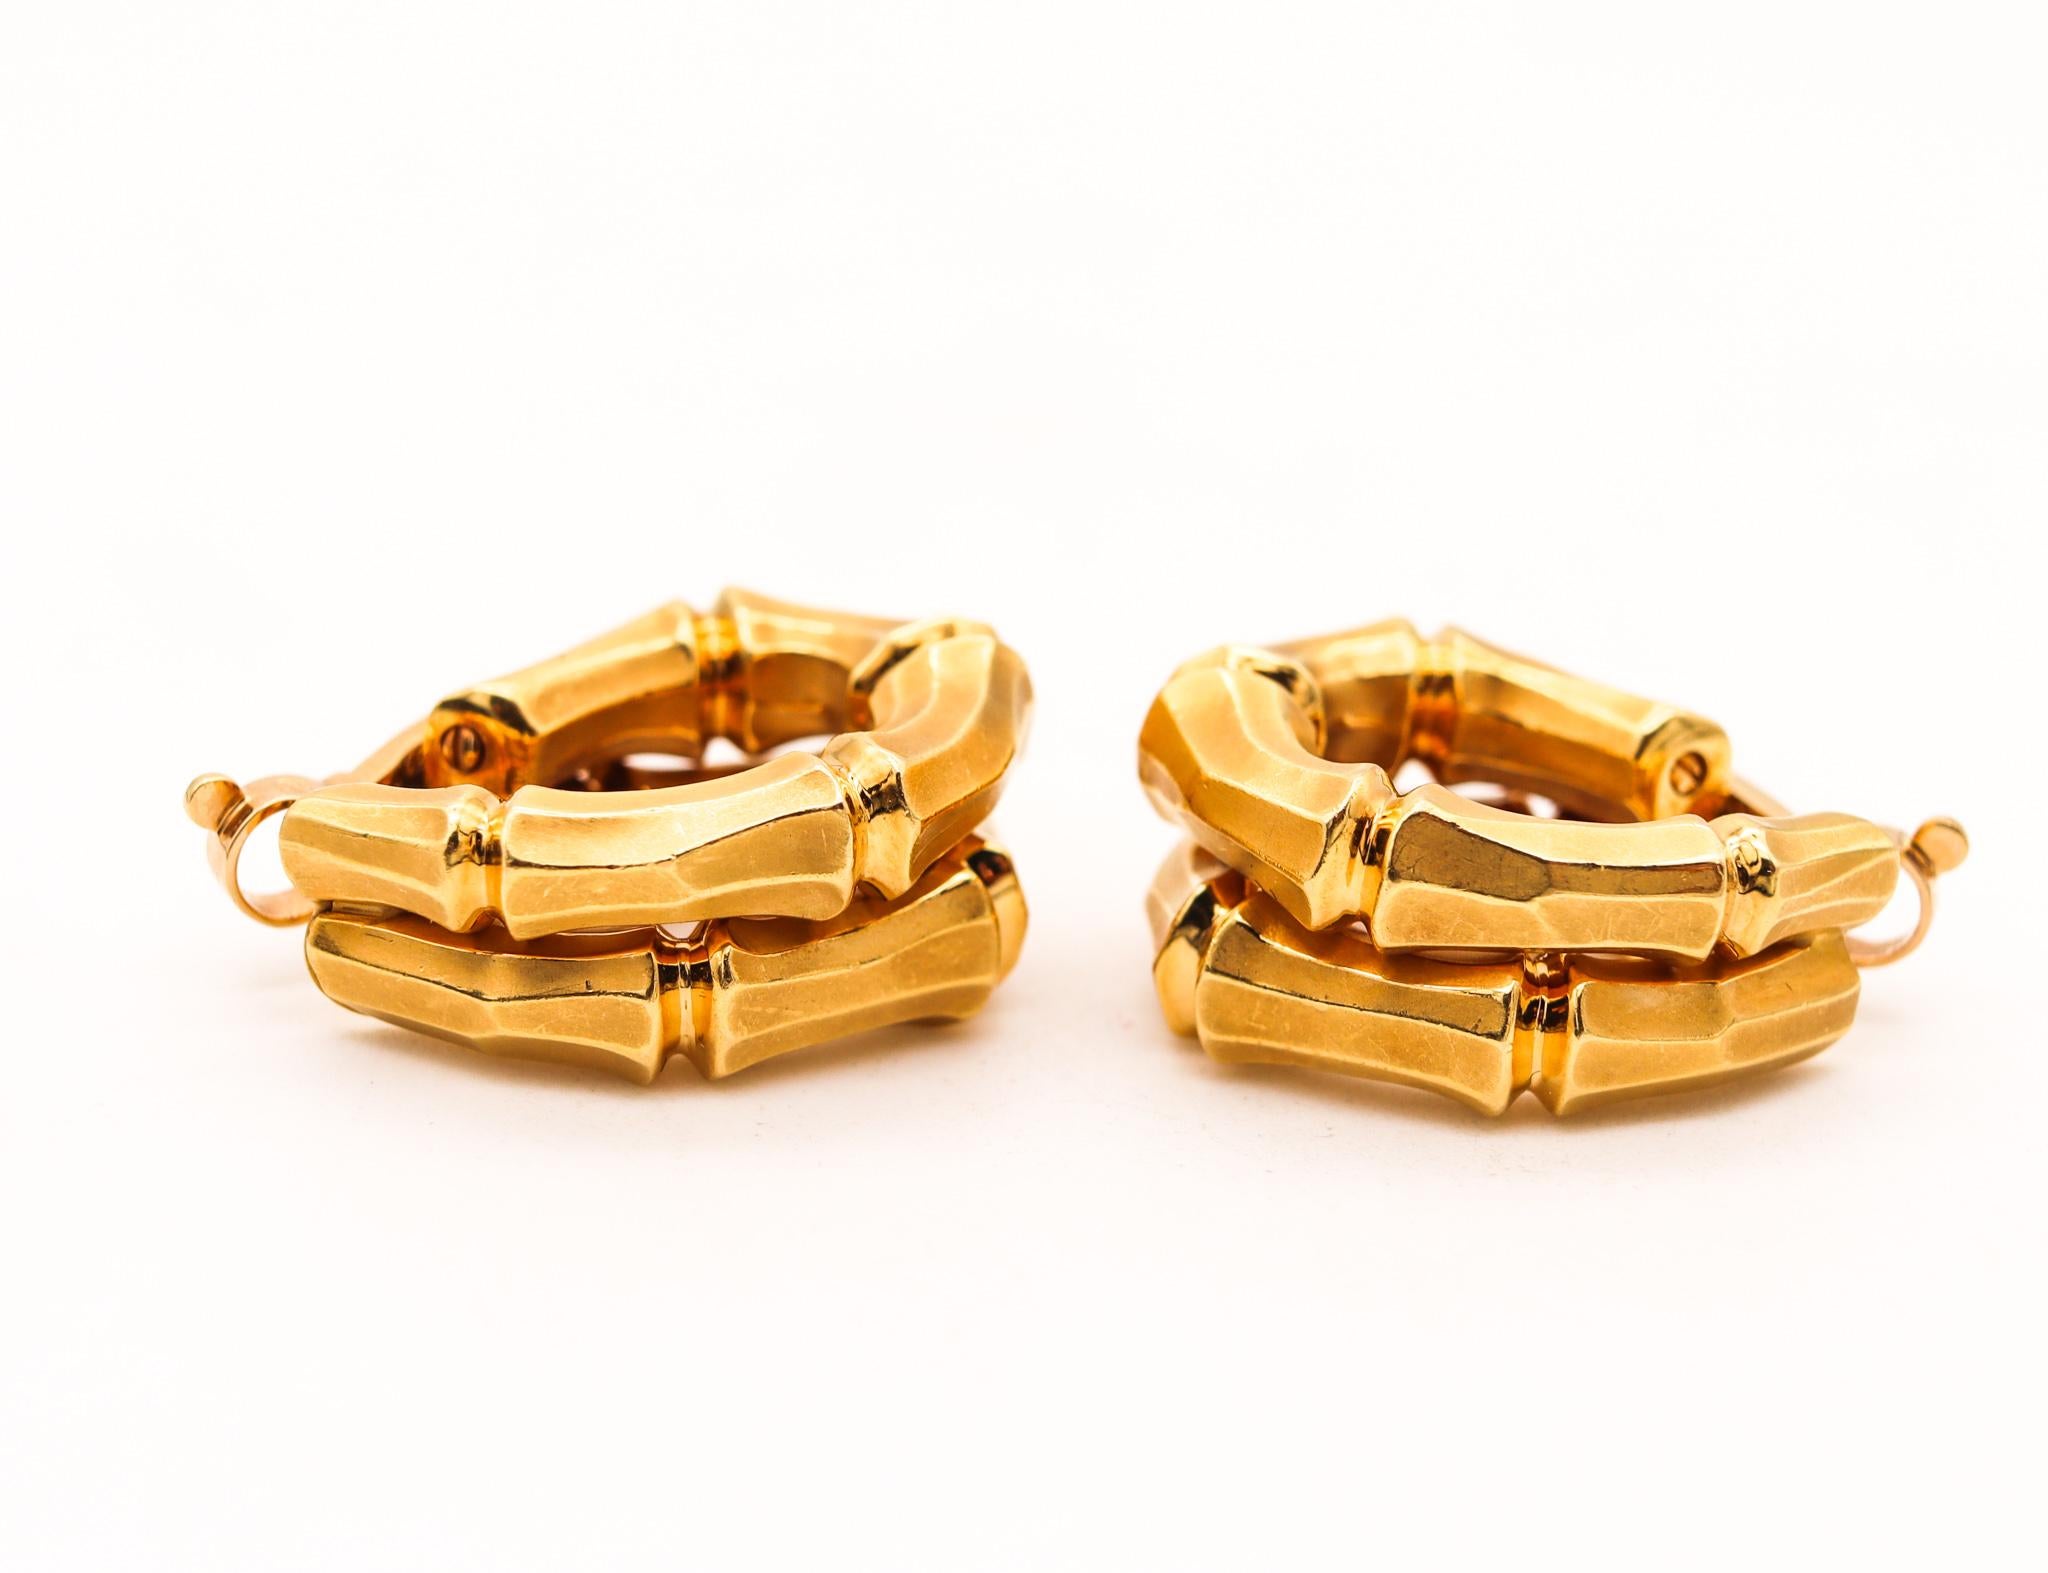 Cartier Paris 1970 Iconic Double Bamboo Hoop Clips Earrings In 18Kt Yellow Gold For Sale 1